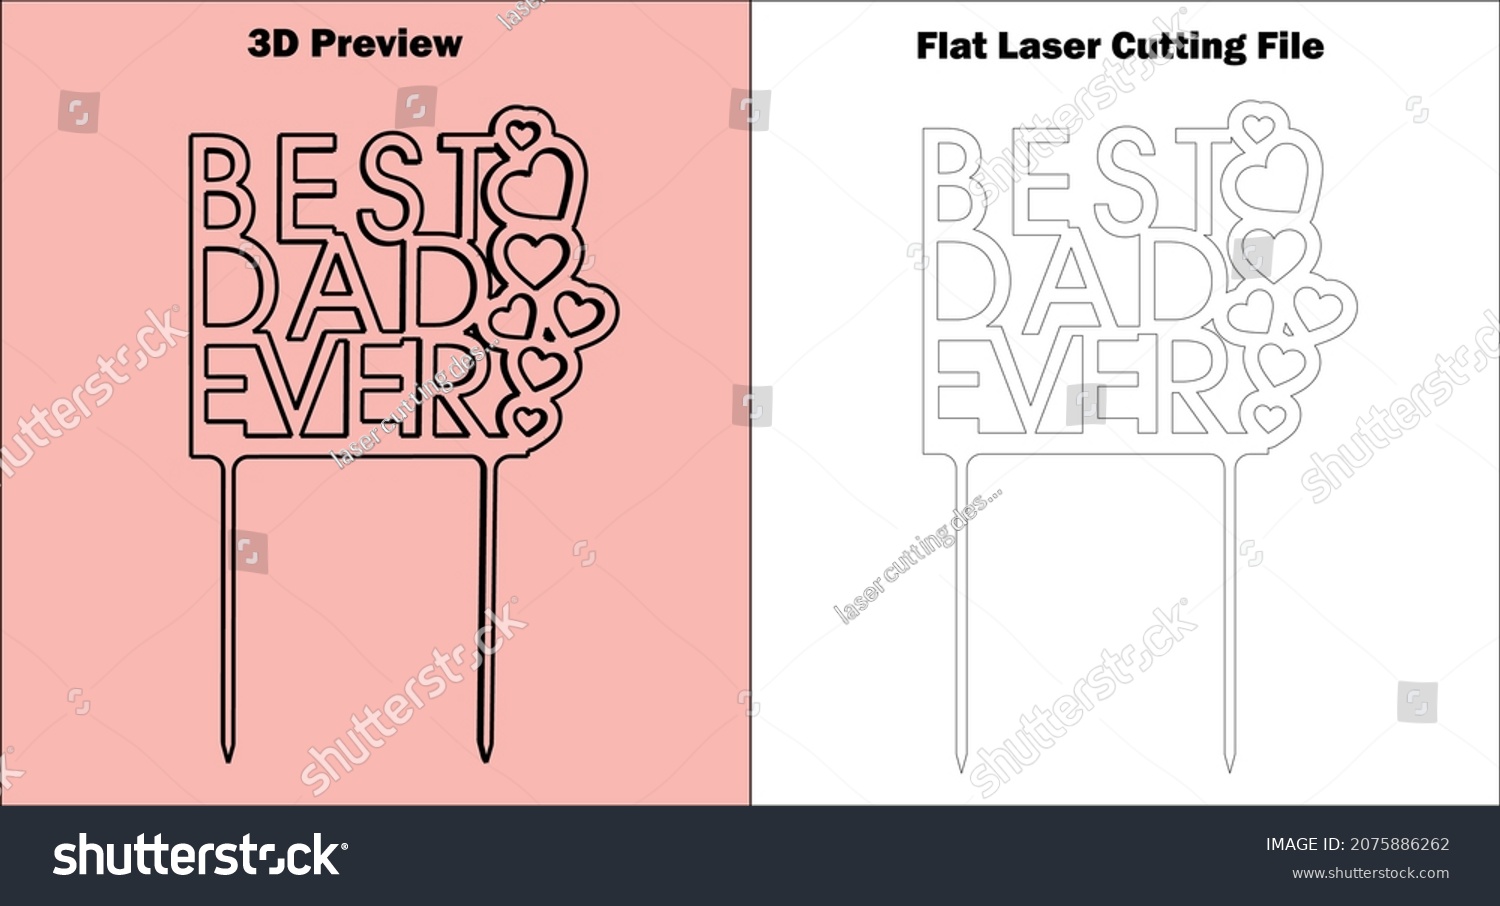 SVG of Cake Topper
this is a lovely cake topper that is available for all material thicknesses. svg